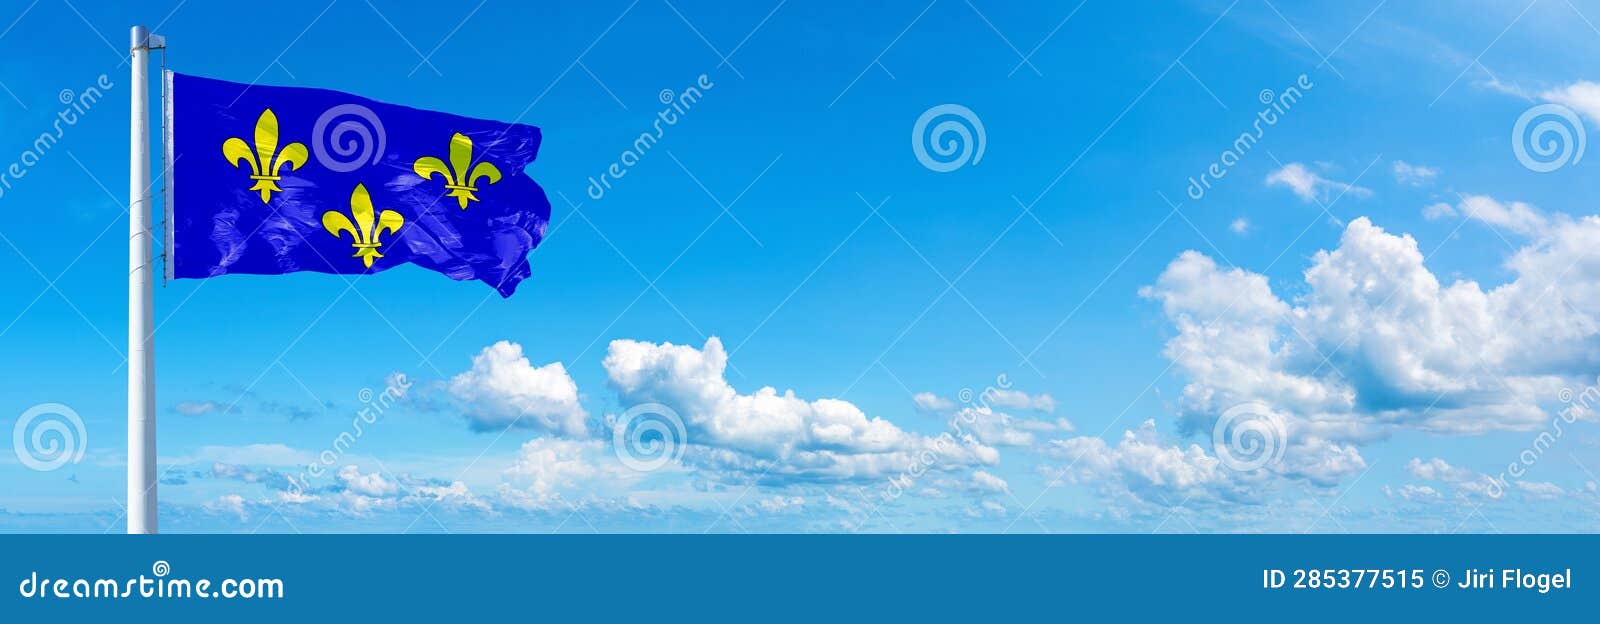 ile-de-france flag - state of france, flag waving on a blue sky in beautiful clouds - horizontal banner